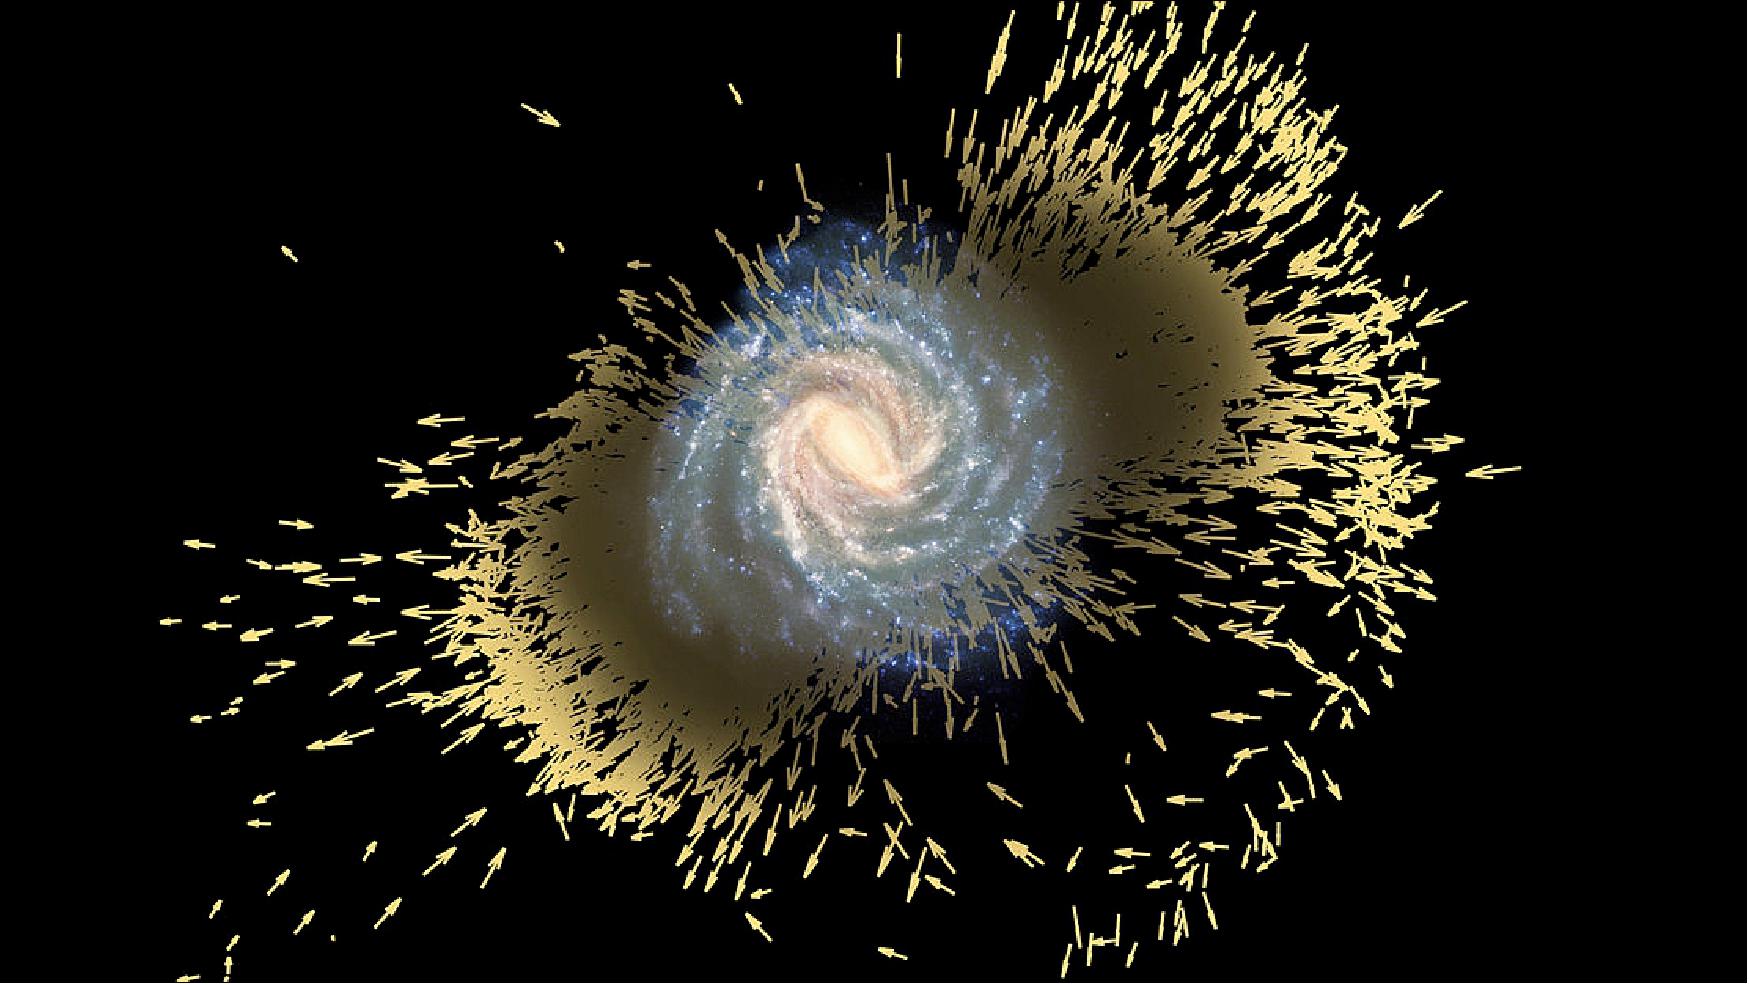 Figure 32: Debris of galactic merger: Artist's impression of debris of the Gaia-Enceladus galaxy. Gaia-Enceladus merged with our Milky Way galaxy during its early formation stages, 10 billion years ago, and its debris can now be found throughout the Galaxy (image credit: ESA (artist's impression and composition); Koppelman, Villalobos and Helmi (simulation), CC BY-SA 3.0 IGO) 30)